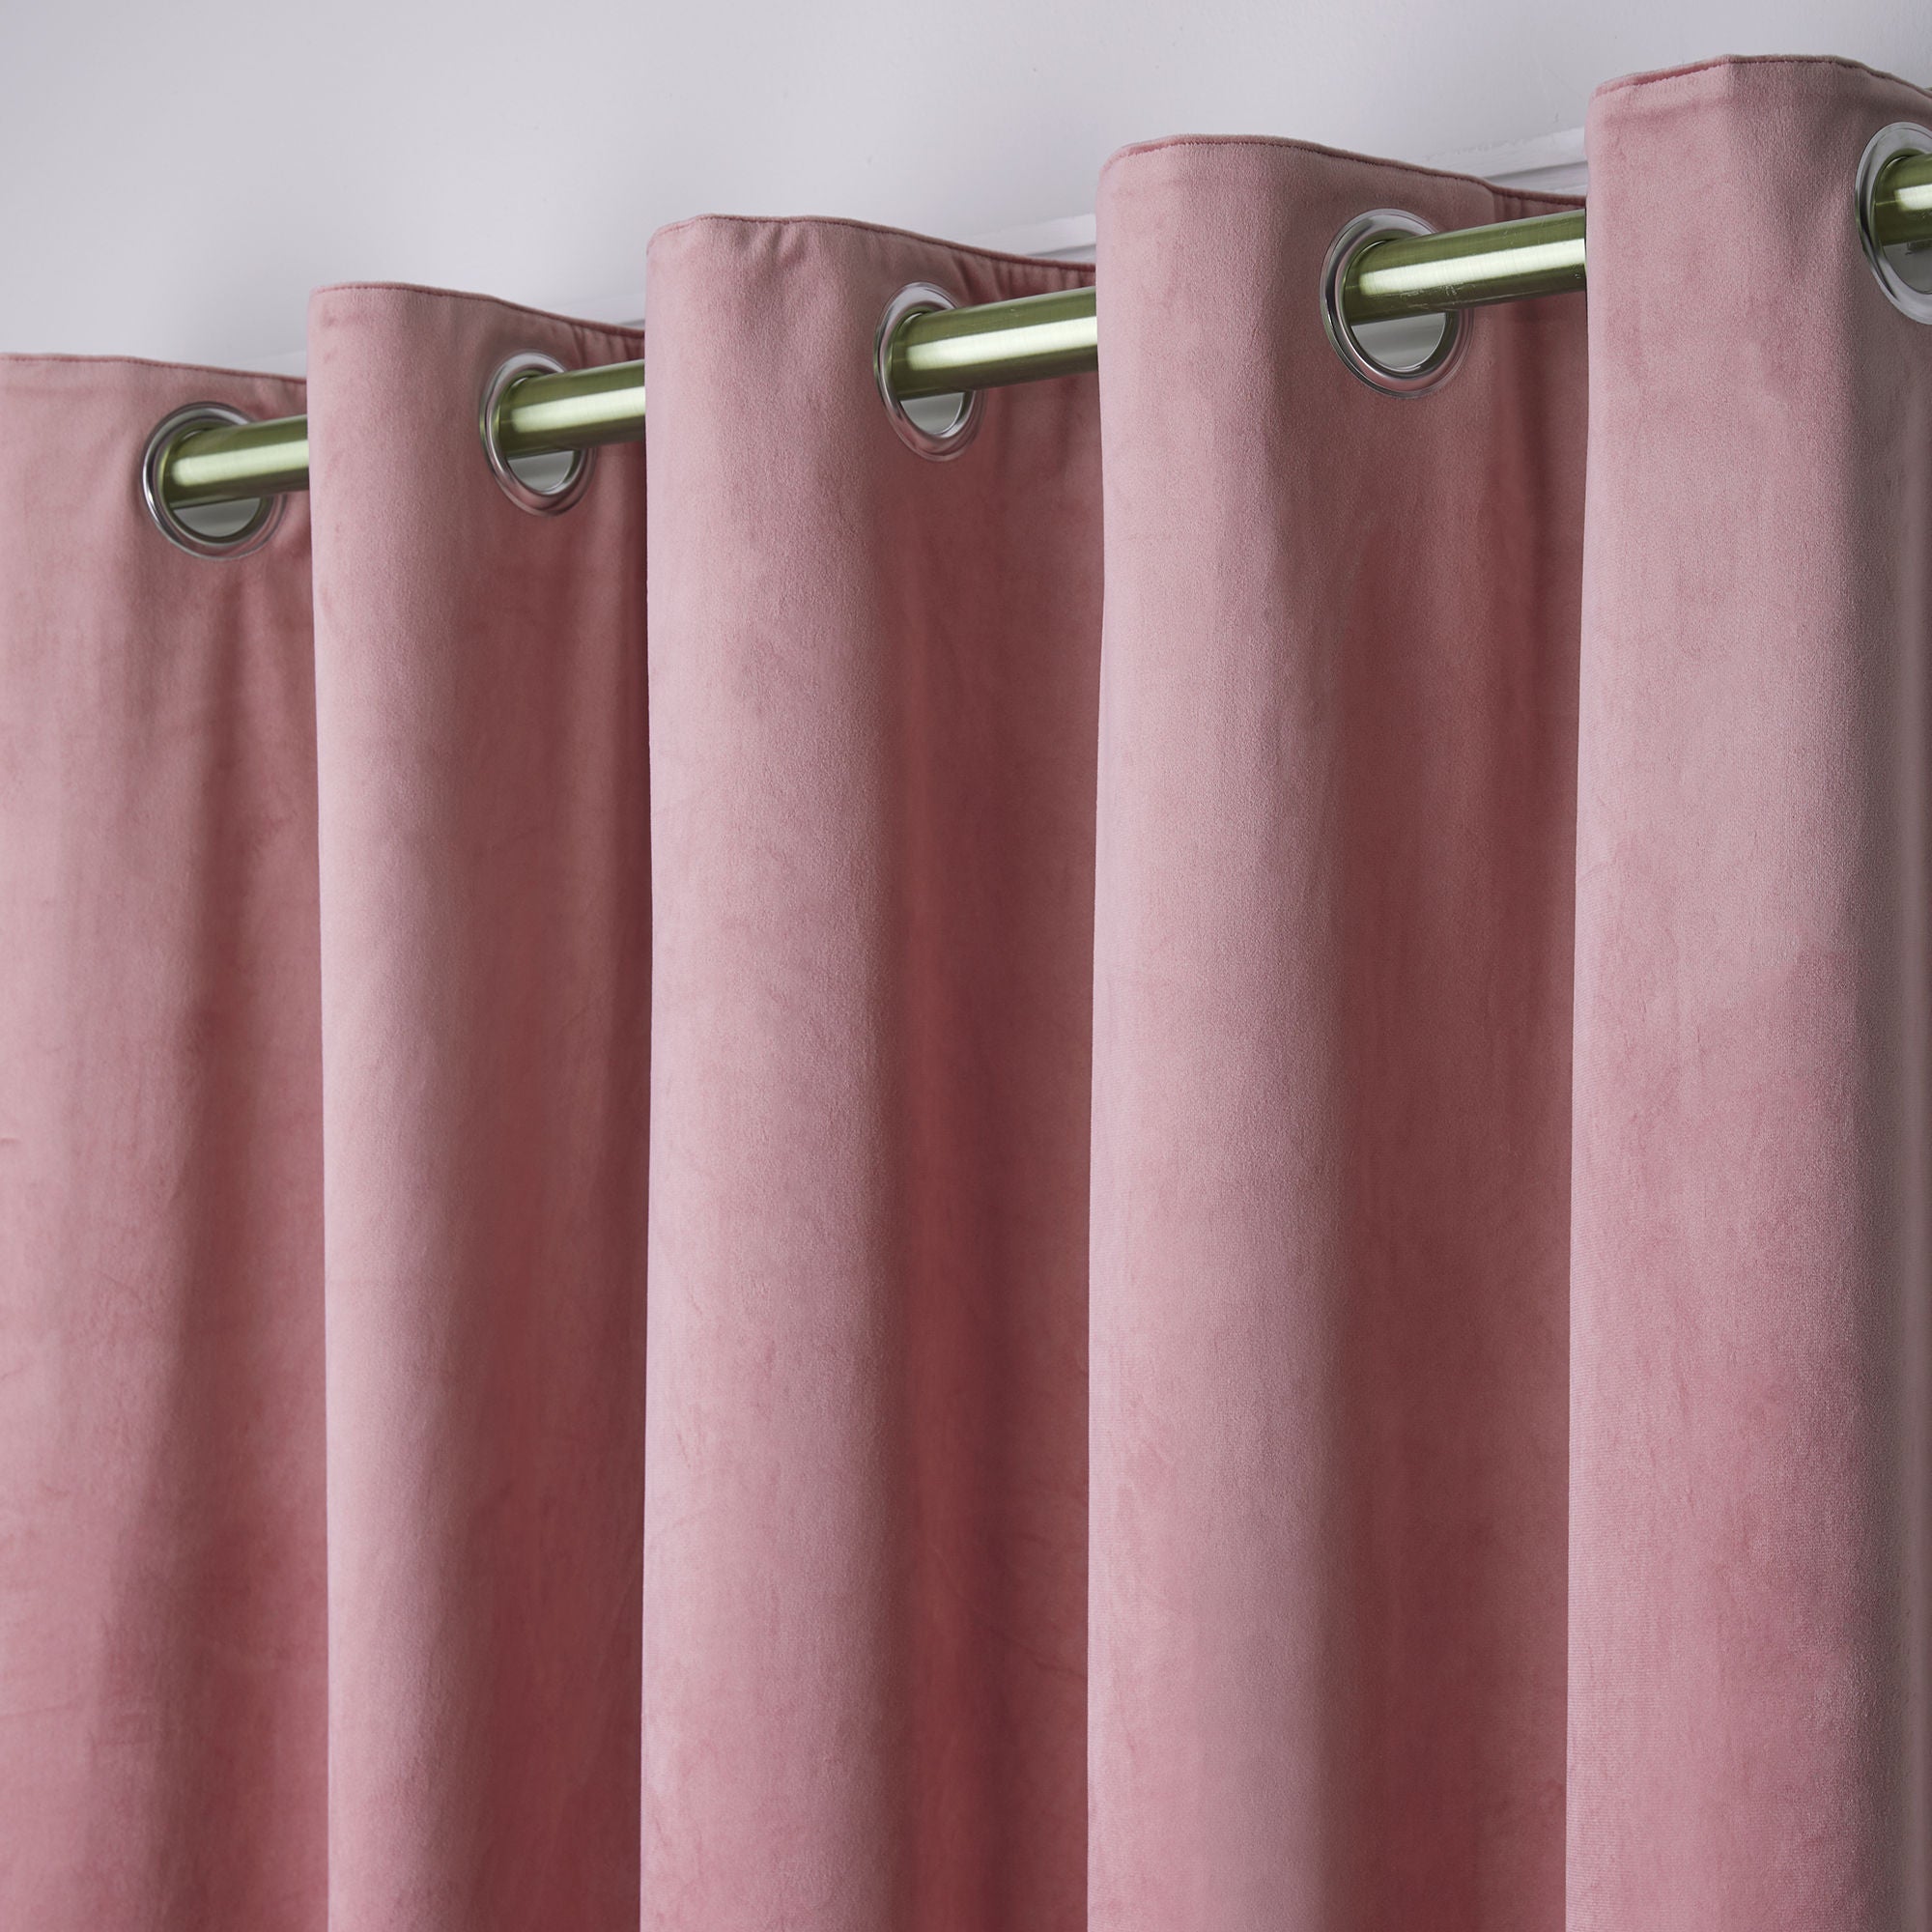 Montrose Pair of Eyelet Curtains by Laurence Llewelyn-Bowen in Blush - Pair of Eyelet Curtains - Laurence Llewelyn-Bowen